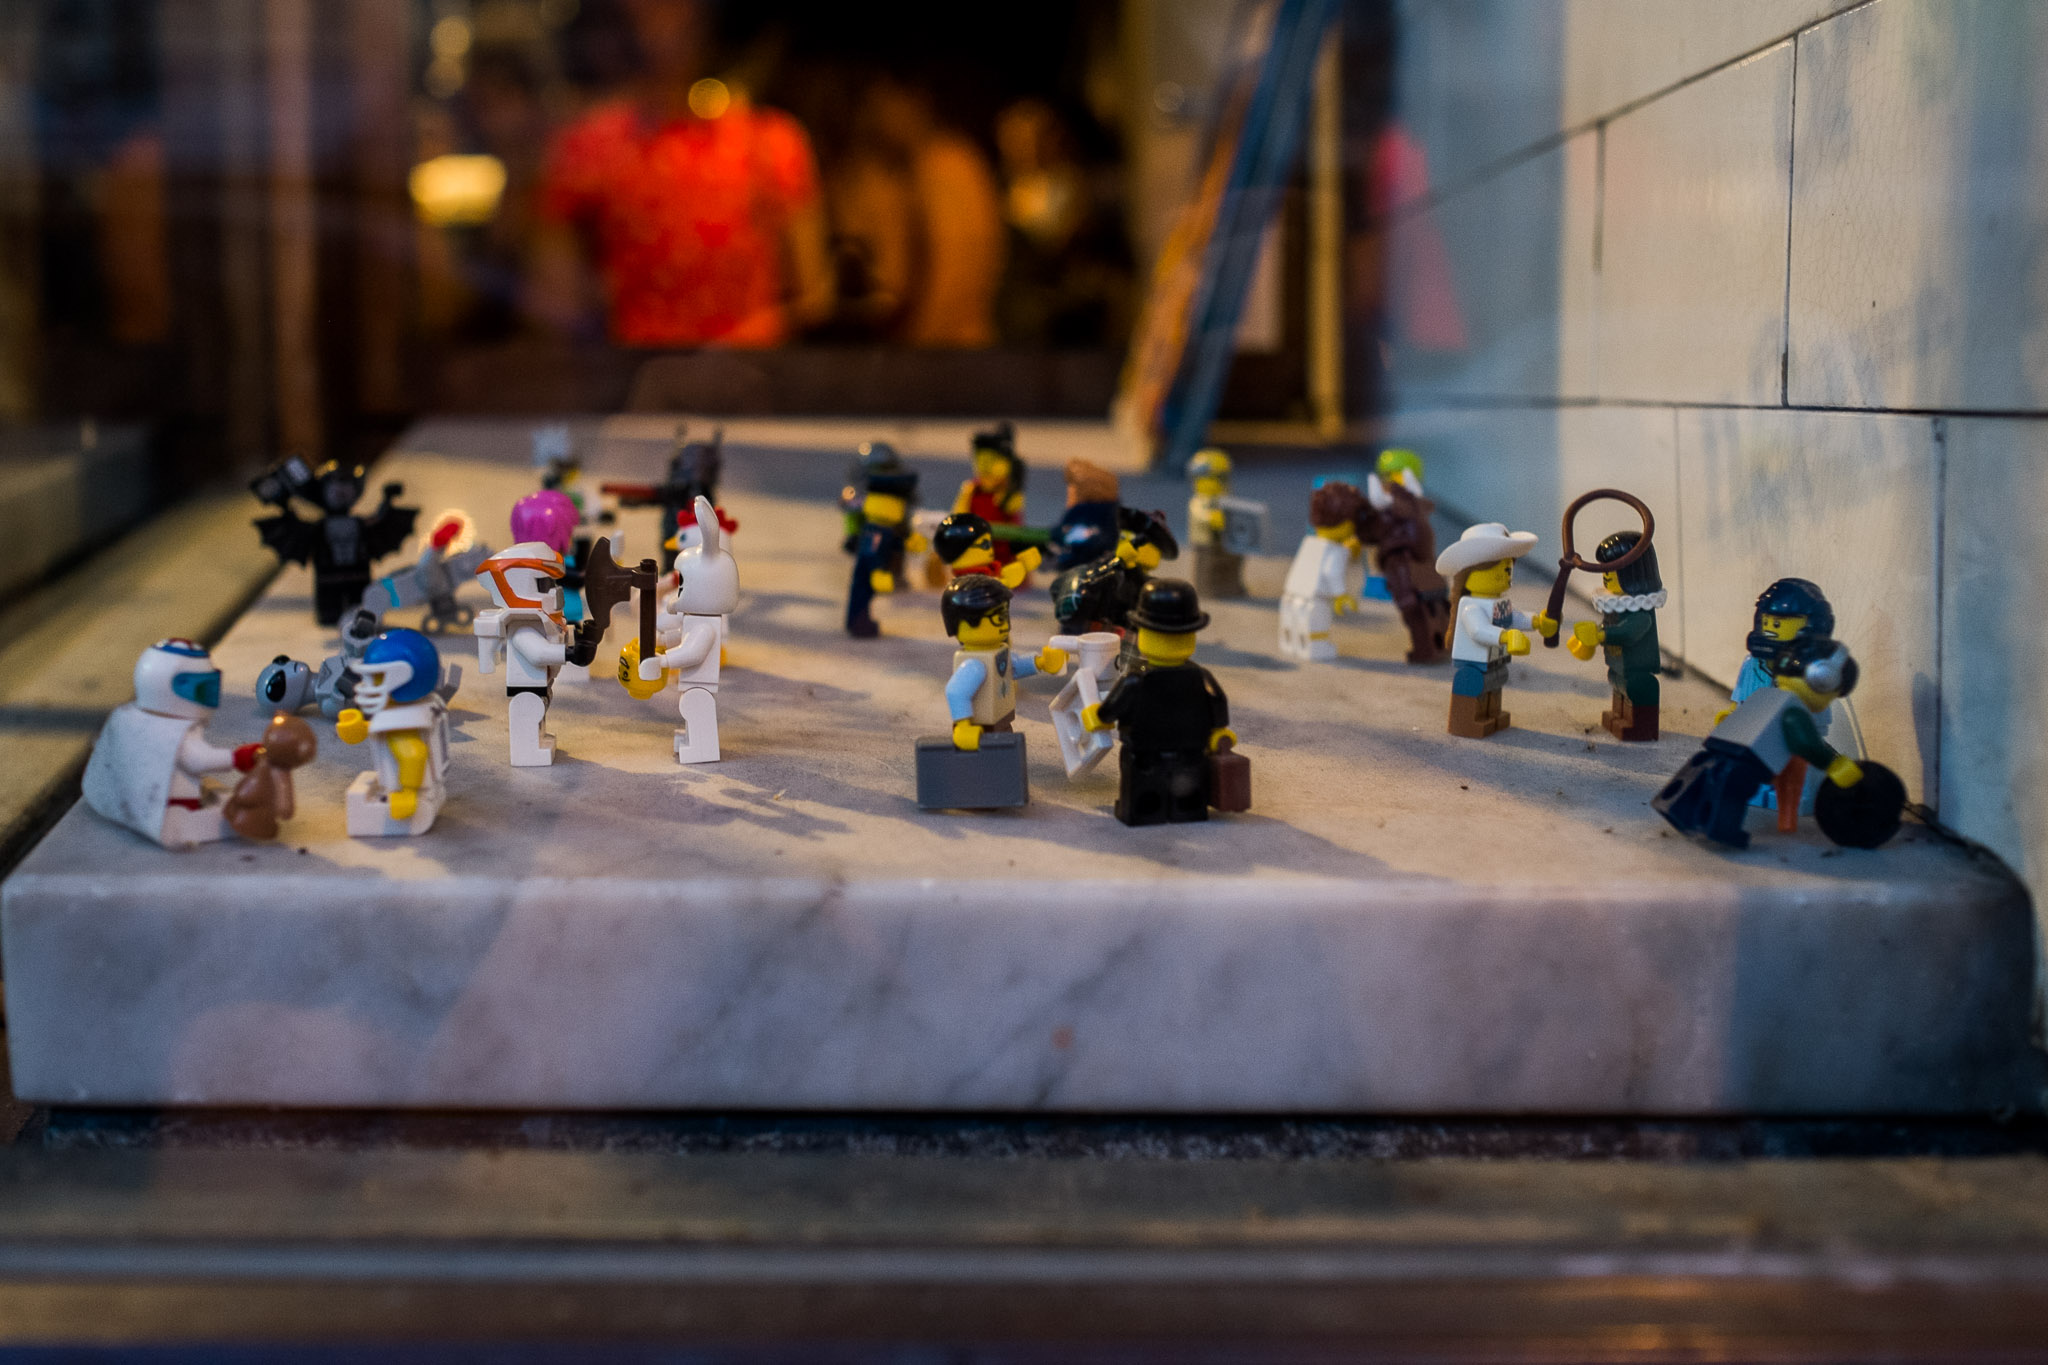 Any place with LEGO people in their front window has to be awesome!